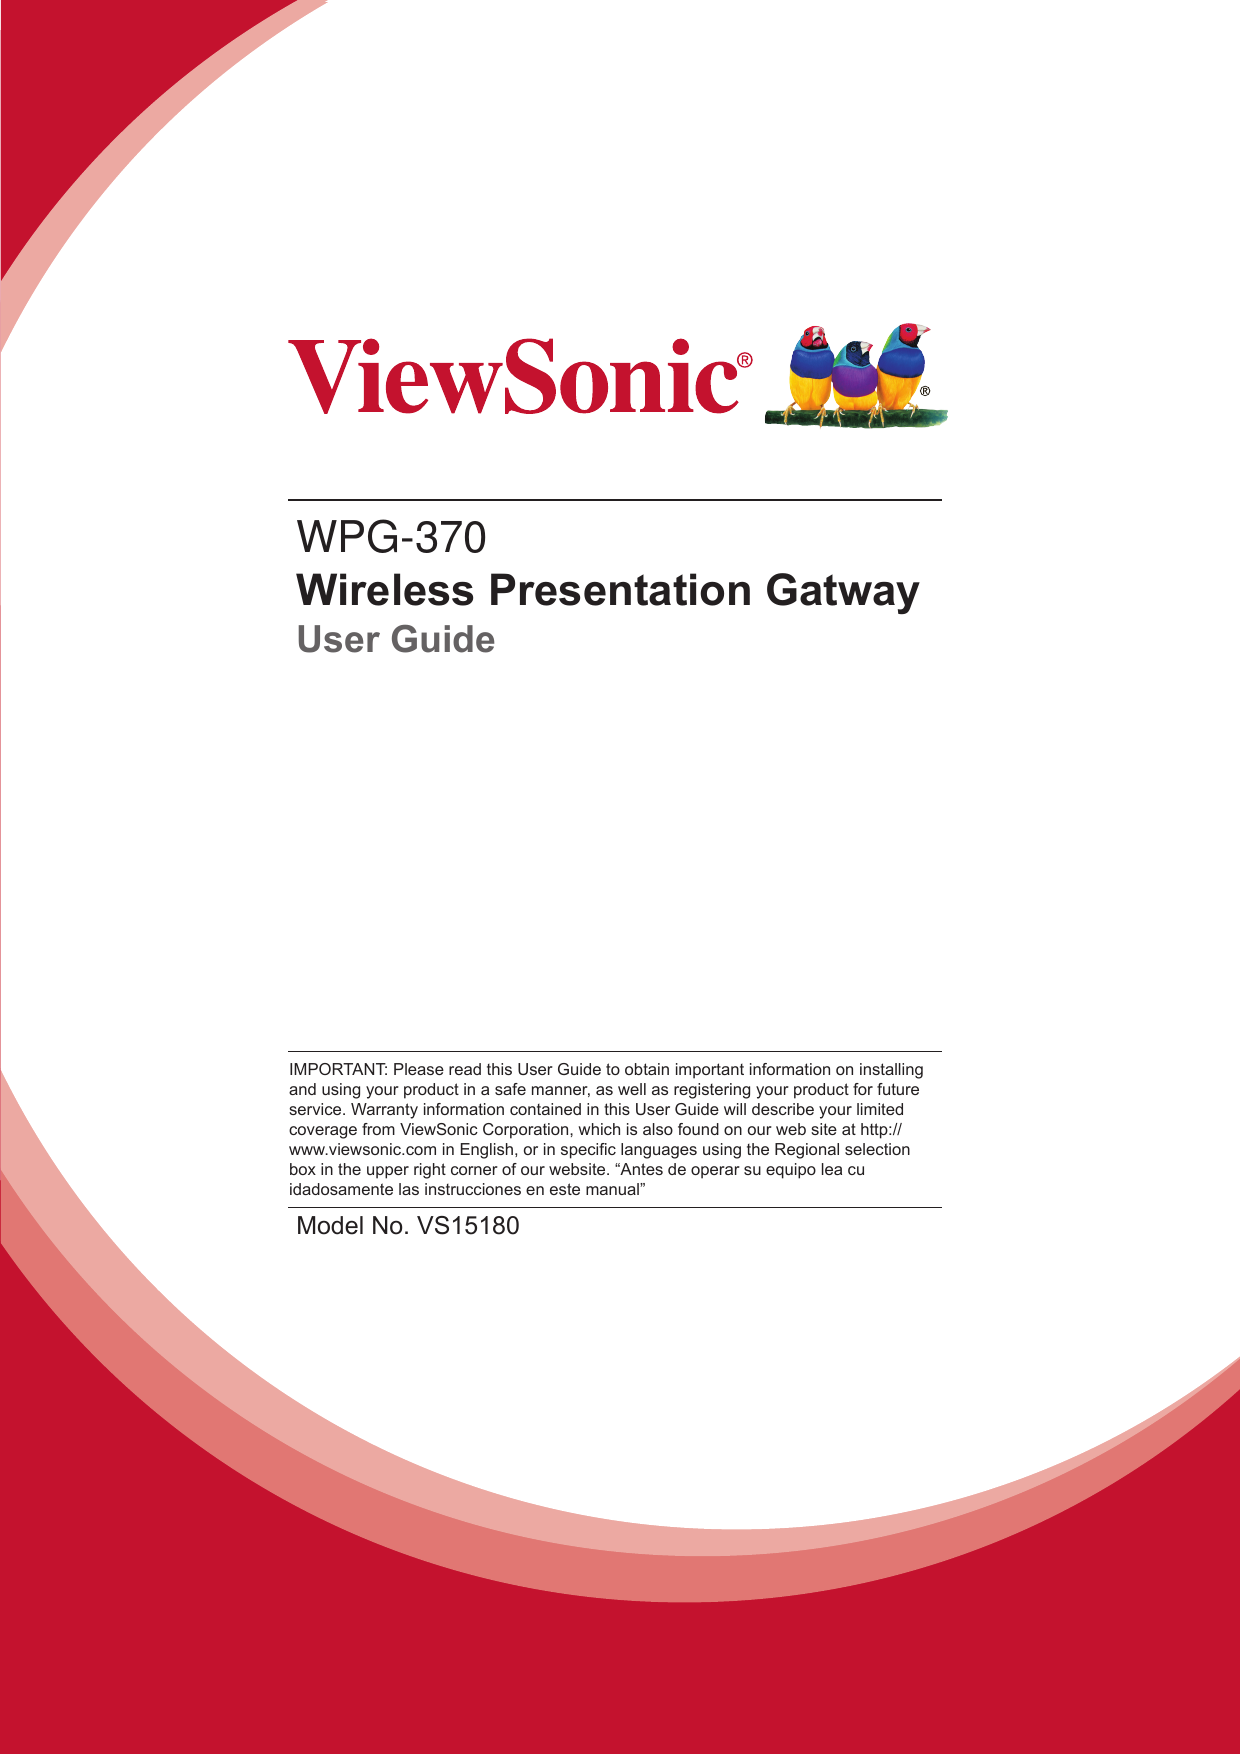 WPG-370Wireless Presentation GatwayUser GuideModel No. VS15180IMPORTANT: Please read this User Guide to obtain important information on installing and using your product in a safe manner, as well as registering your product for future service. Warranty information contained in this User Guide will describe your limited coverage from ViewSonic Corporation, which is also found on our web site at http://www.viewsonic.com in English, or in specic languages using the Regional selection box in the upper right corner of our website. “Antes de operar su equipo lea cu idadosamente las instrucciones en este manual”